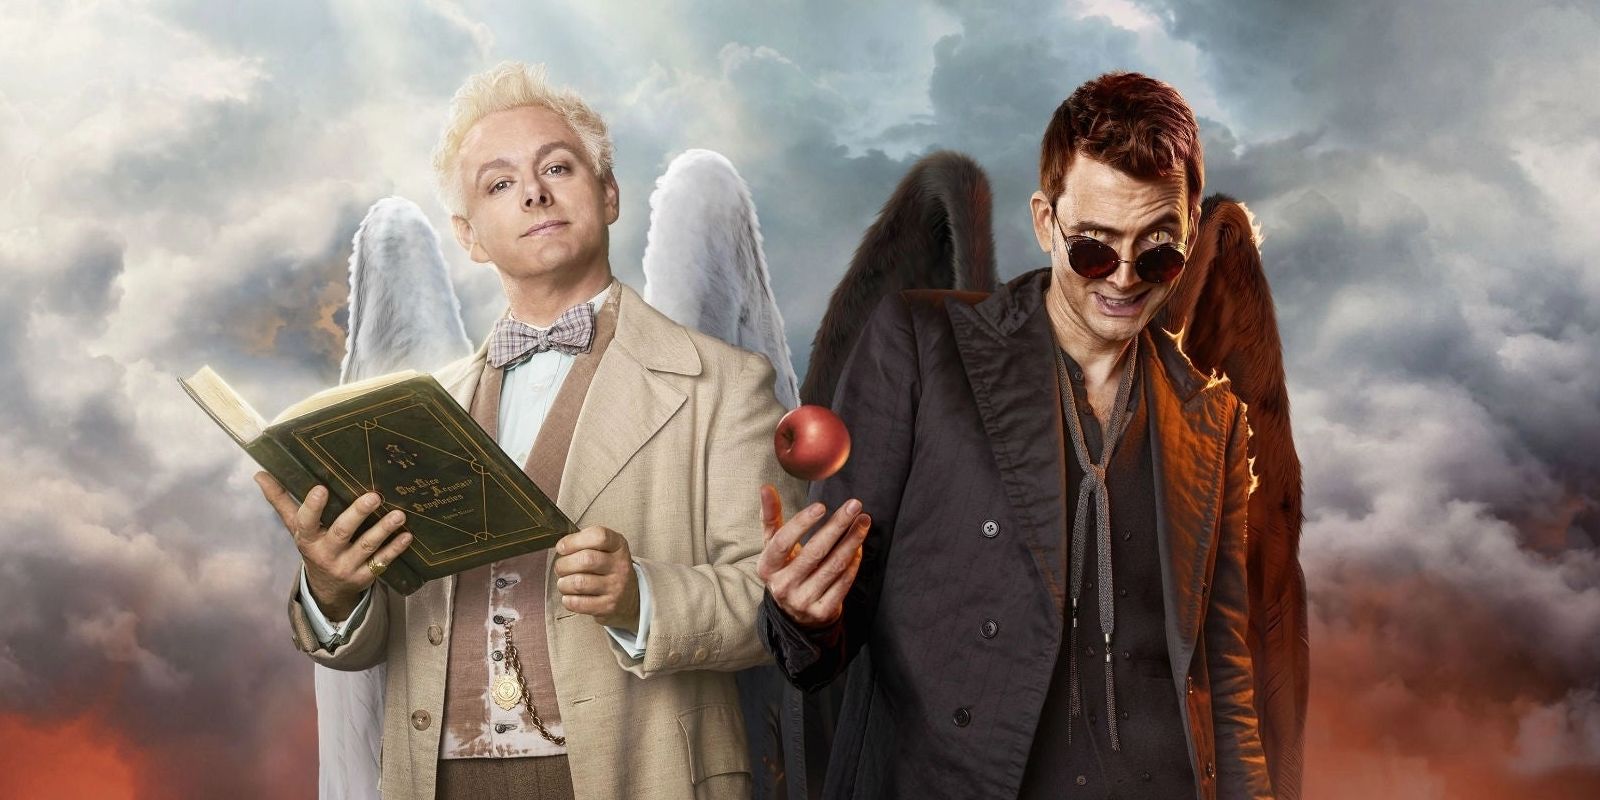 Michael Sheen and David Tennant in the Amazon Good Omens